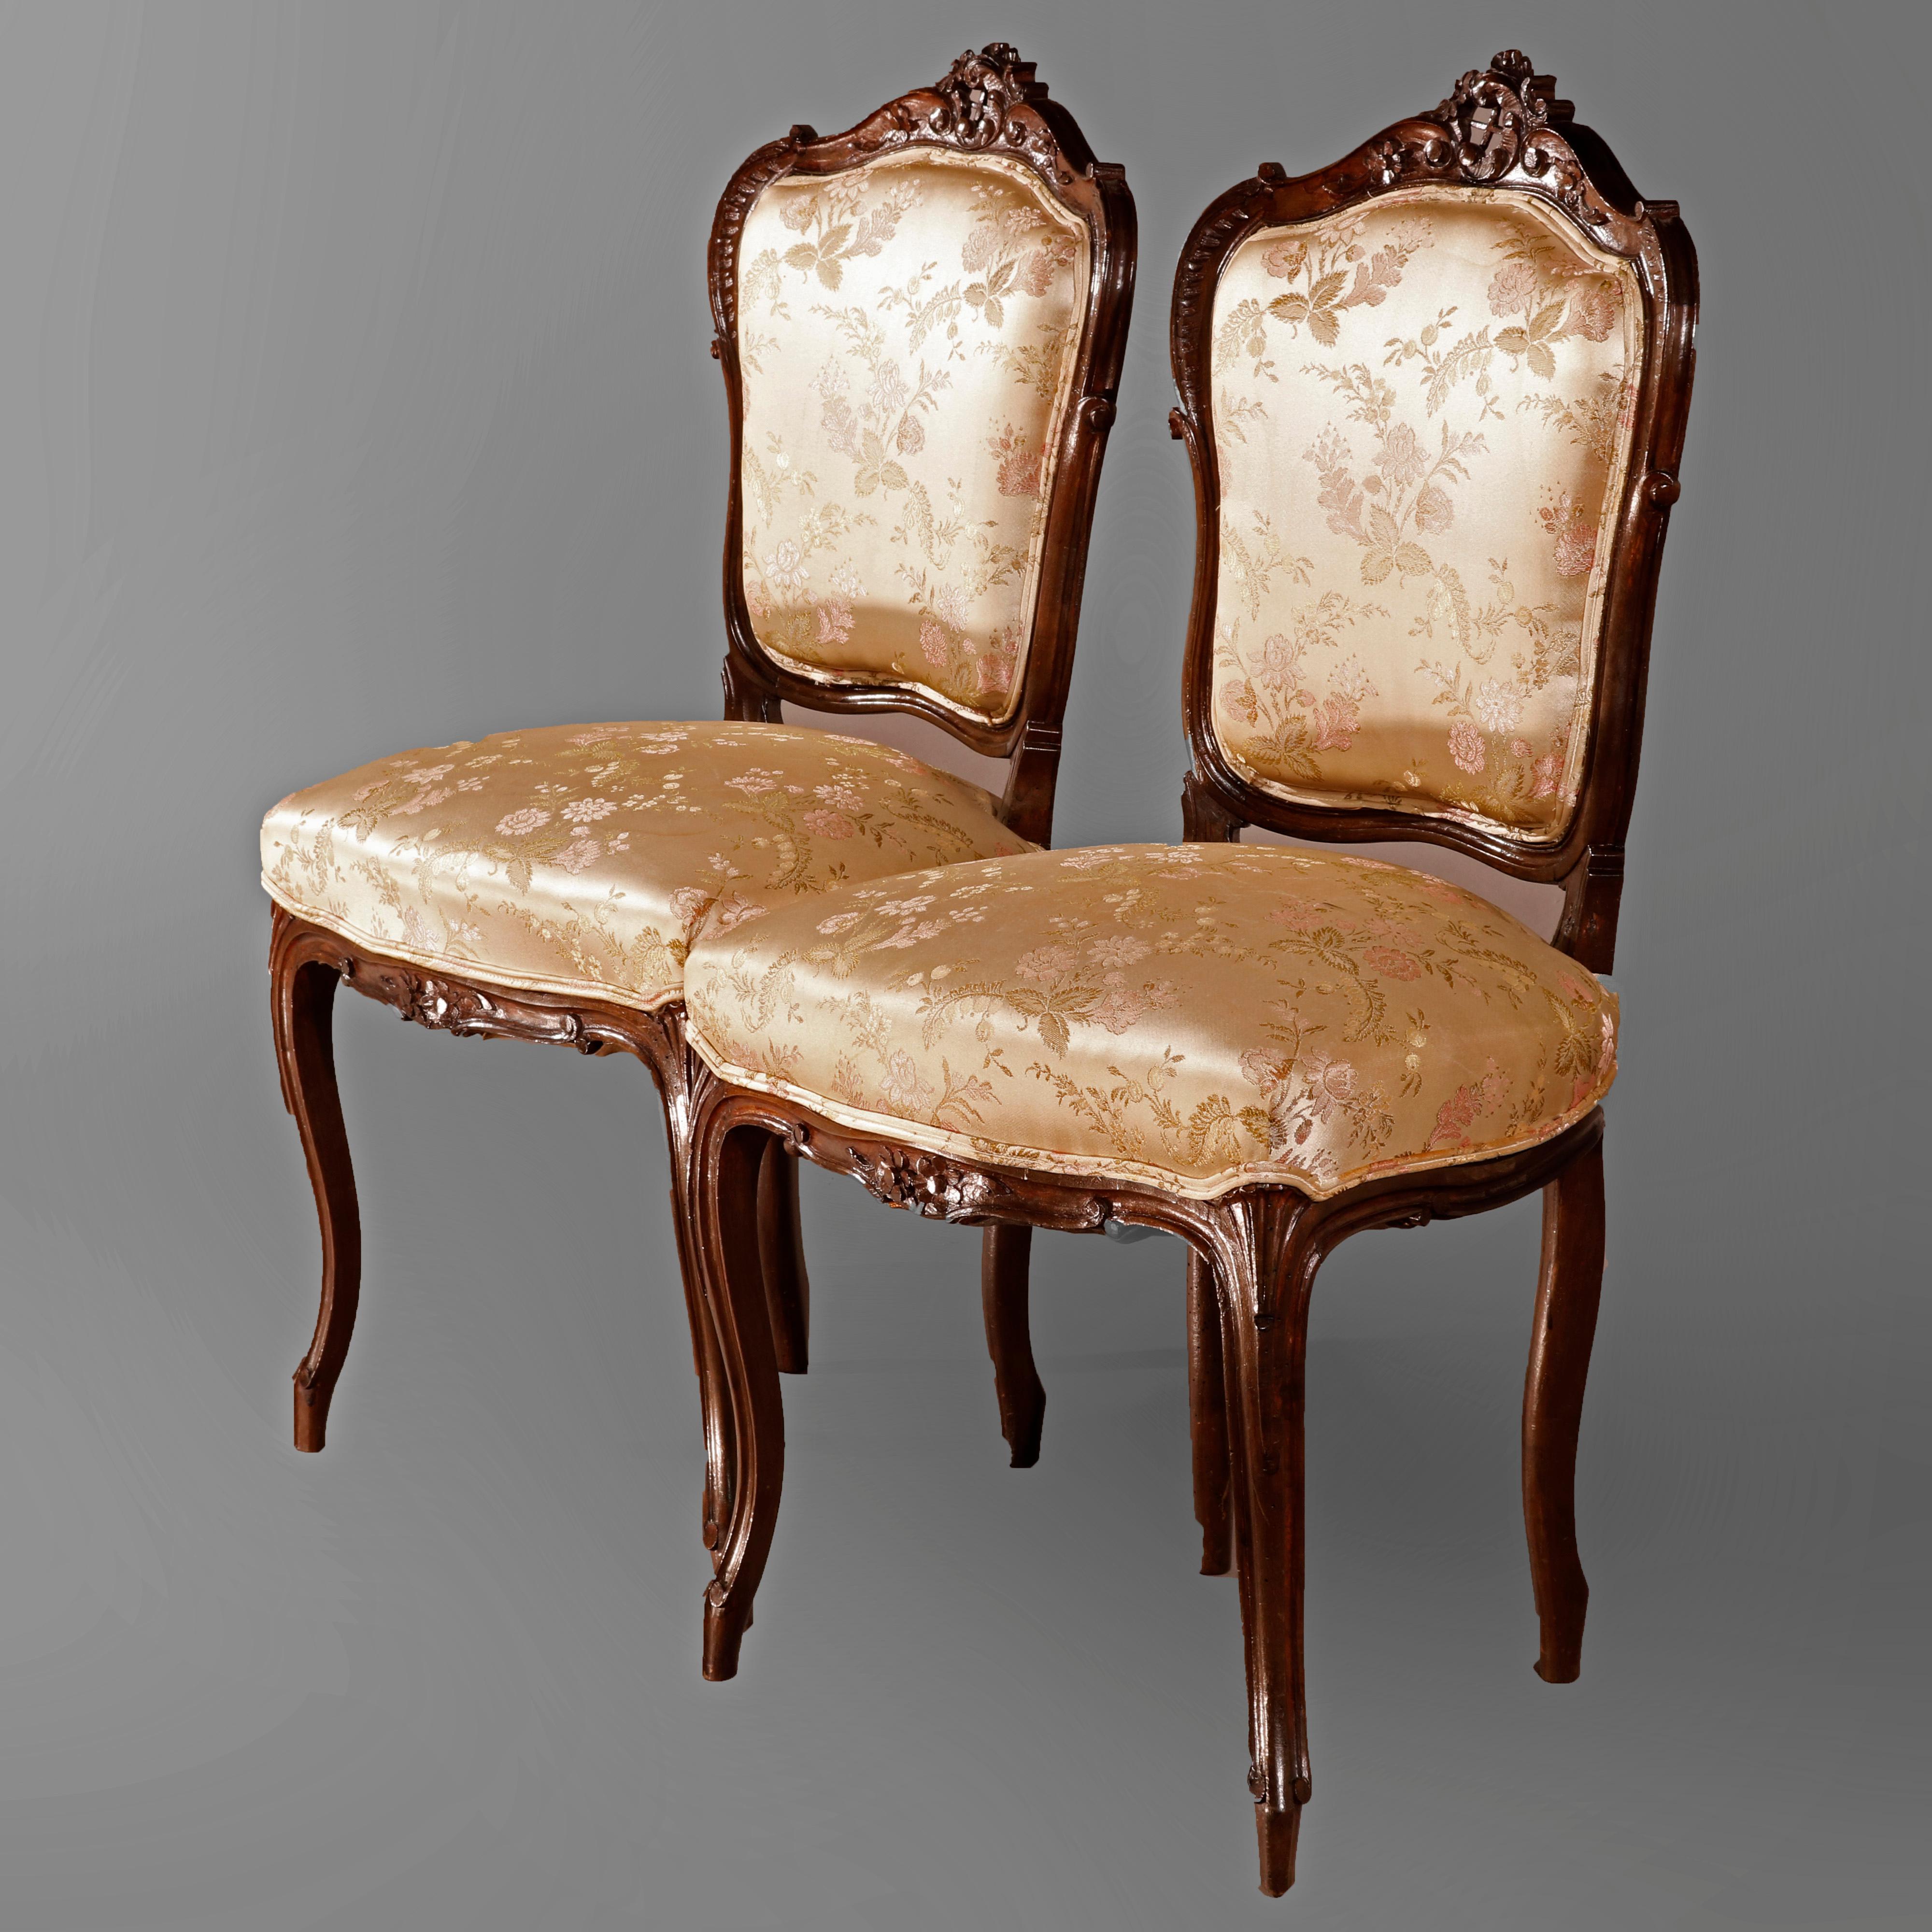 An antique pair of French Louis XV style parlor side chairs offer walnut frames with carved foliate crests surmounting upholstered backs and seats, raised on cabriole legs, circa 1890

Measures: 36